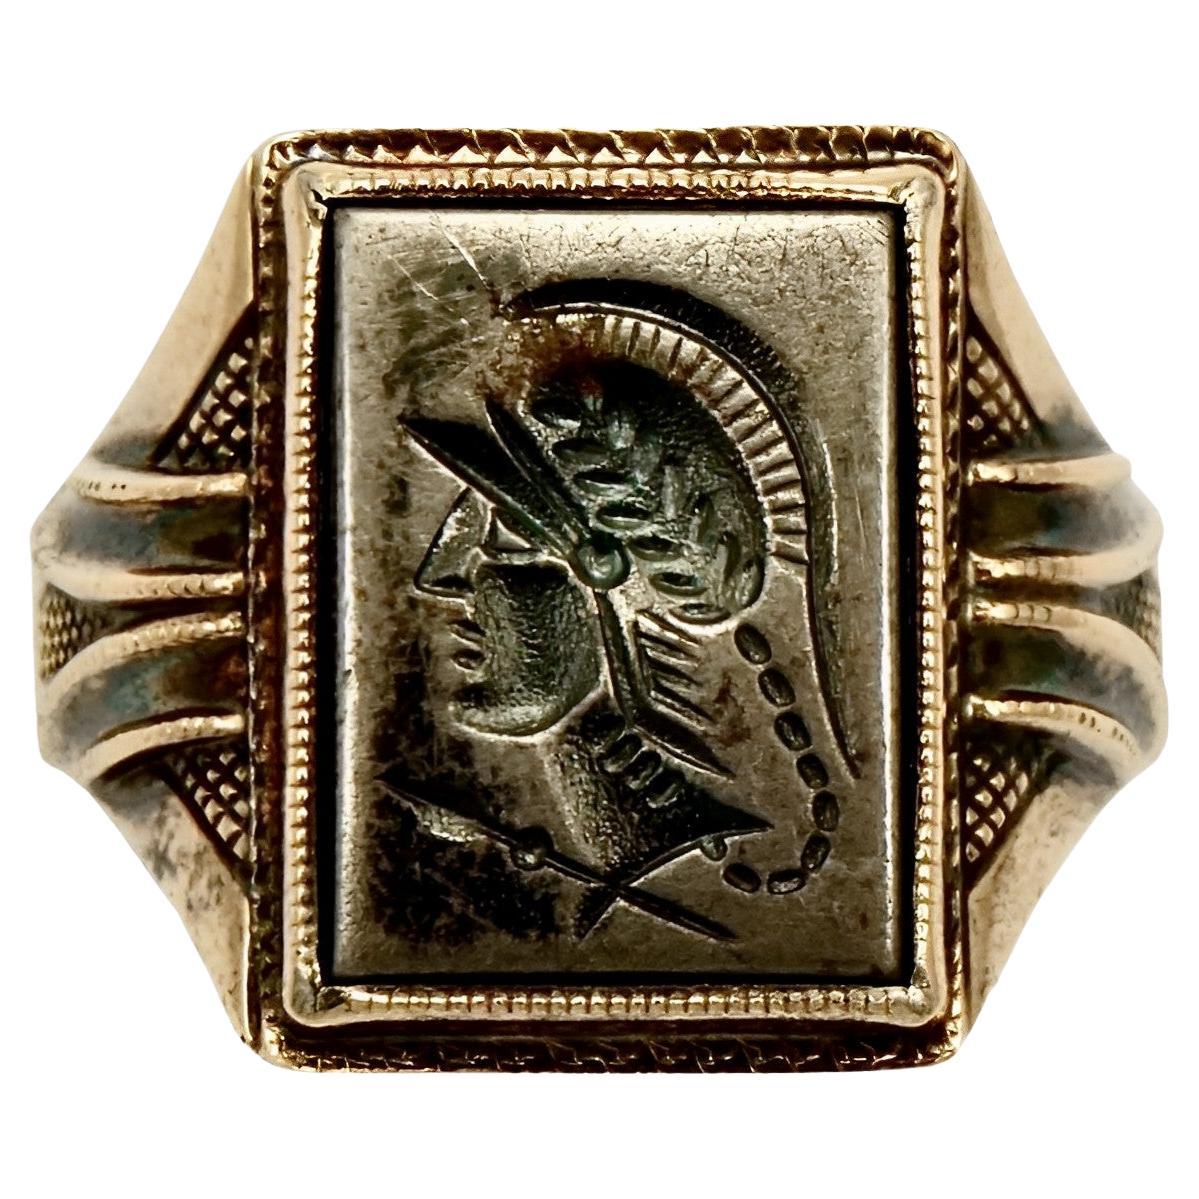 10K Rose Gold and Sterling Silver Haematite Intaglio Warrior Ring circa 1940s